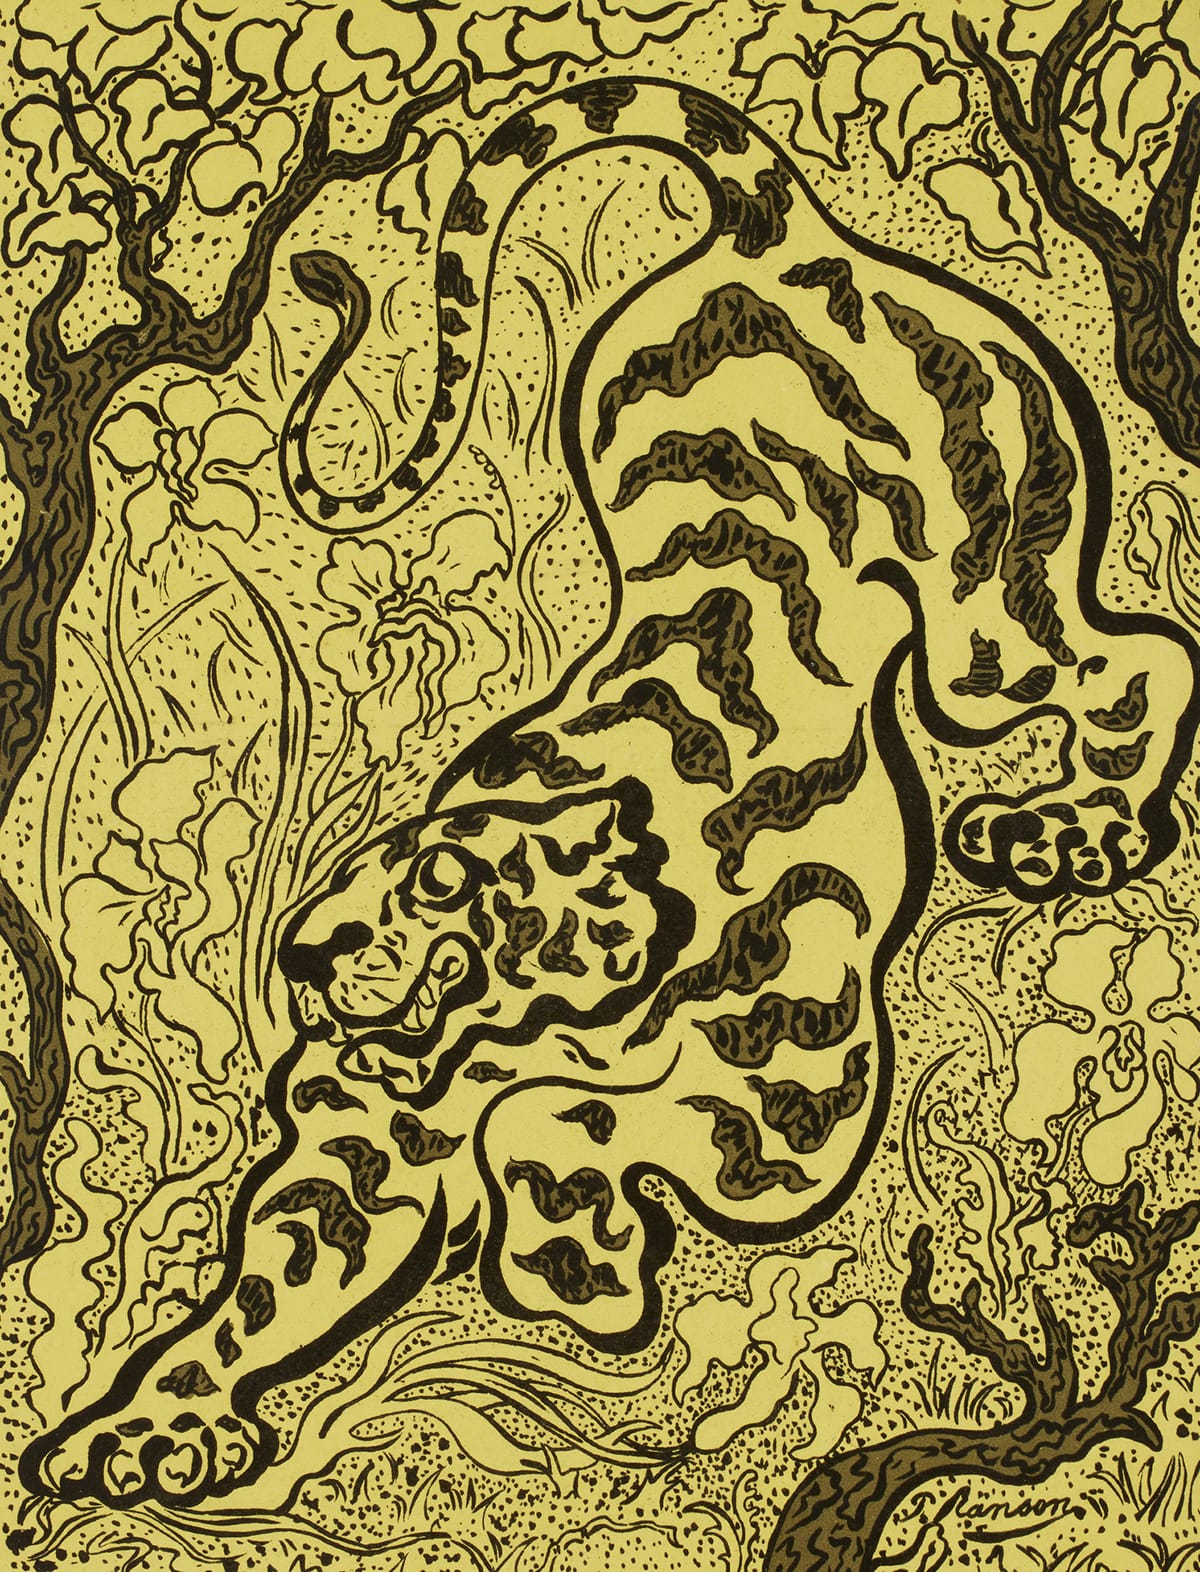 Vibrant yellow background with playful black lines depicting a tiger amidst flora ready to pounce.